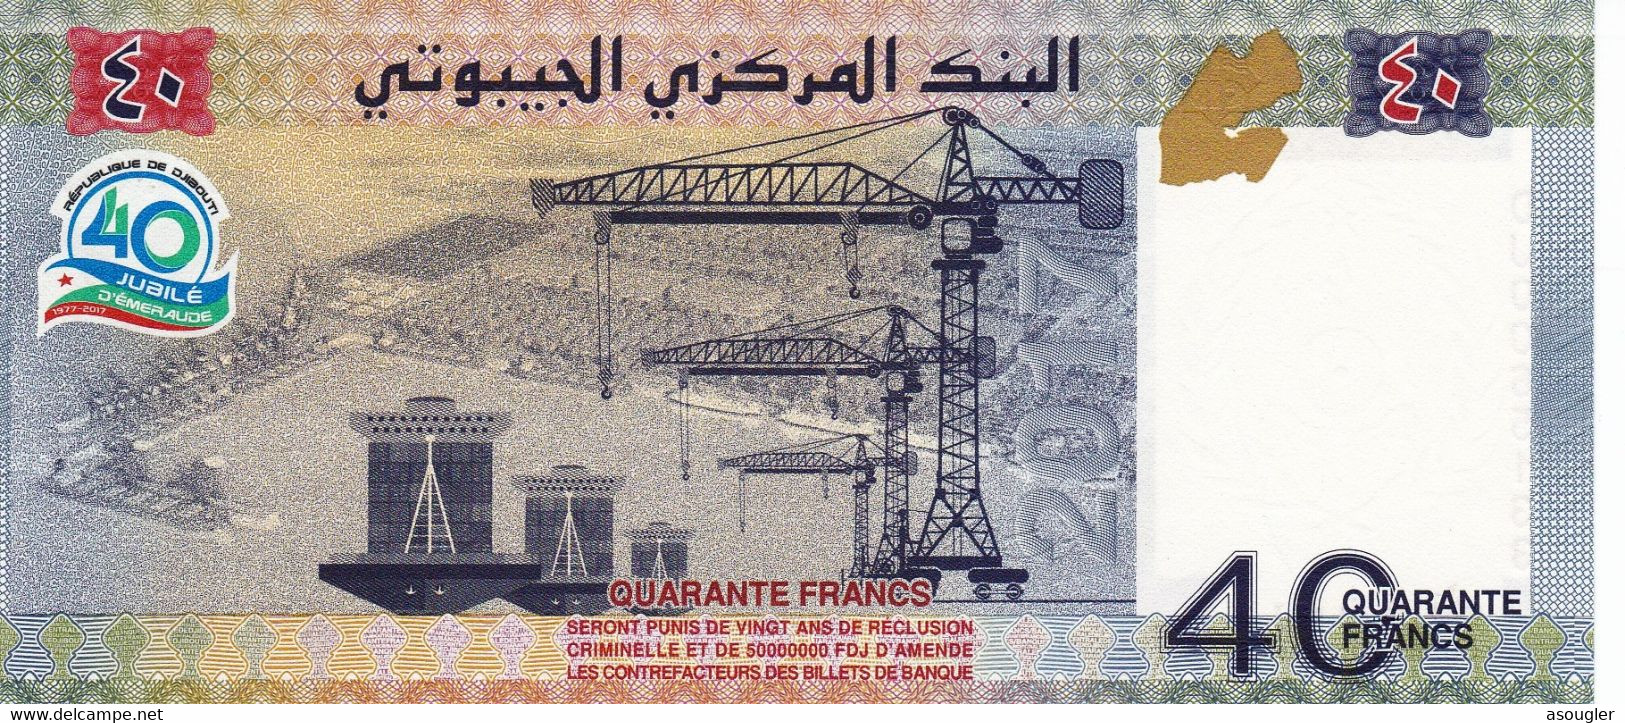 Djibouti 40 Francs 2017 UNC P-46 Commemorative Issue 40th Anniversary Of Independence. Free S/H Via Regular Air Mail. - Gibuti